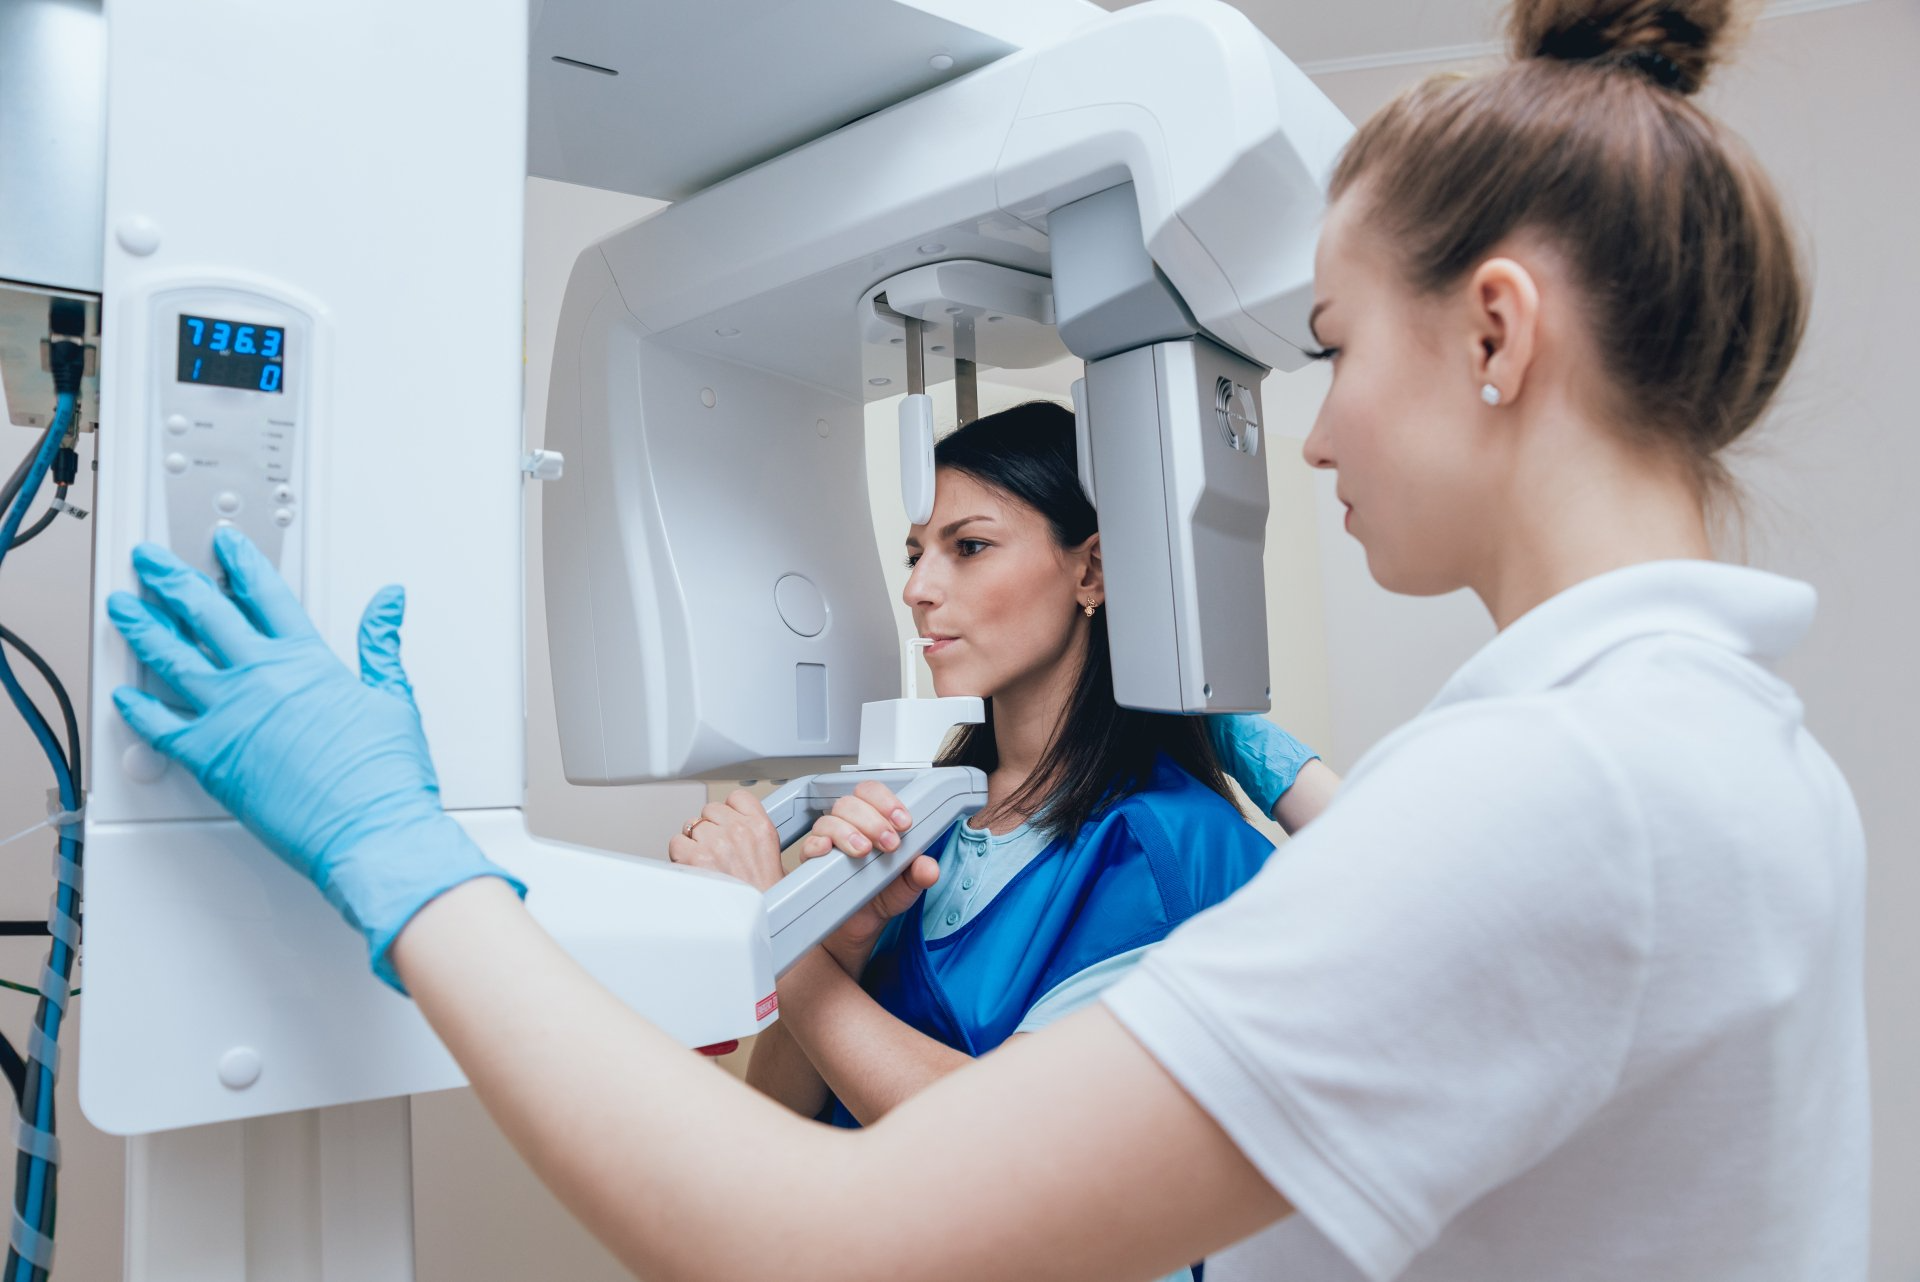 Surfside Dental | Best Dentist in Cape Coral and Fort Myers, Florida | Dental technology | x ray machine | dentist near you | female patient getting an x ray